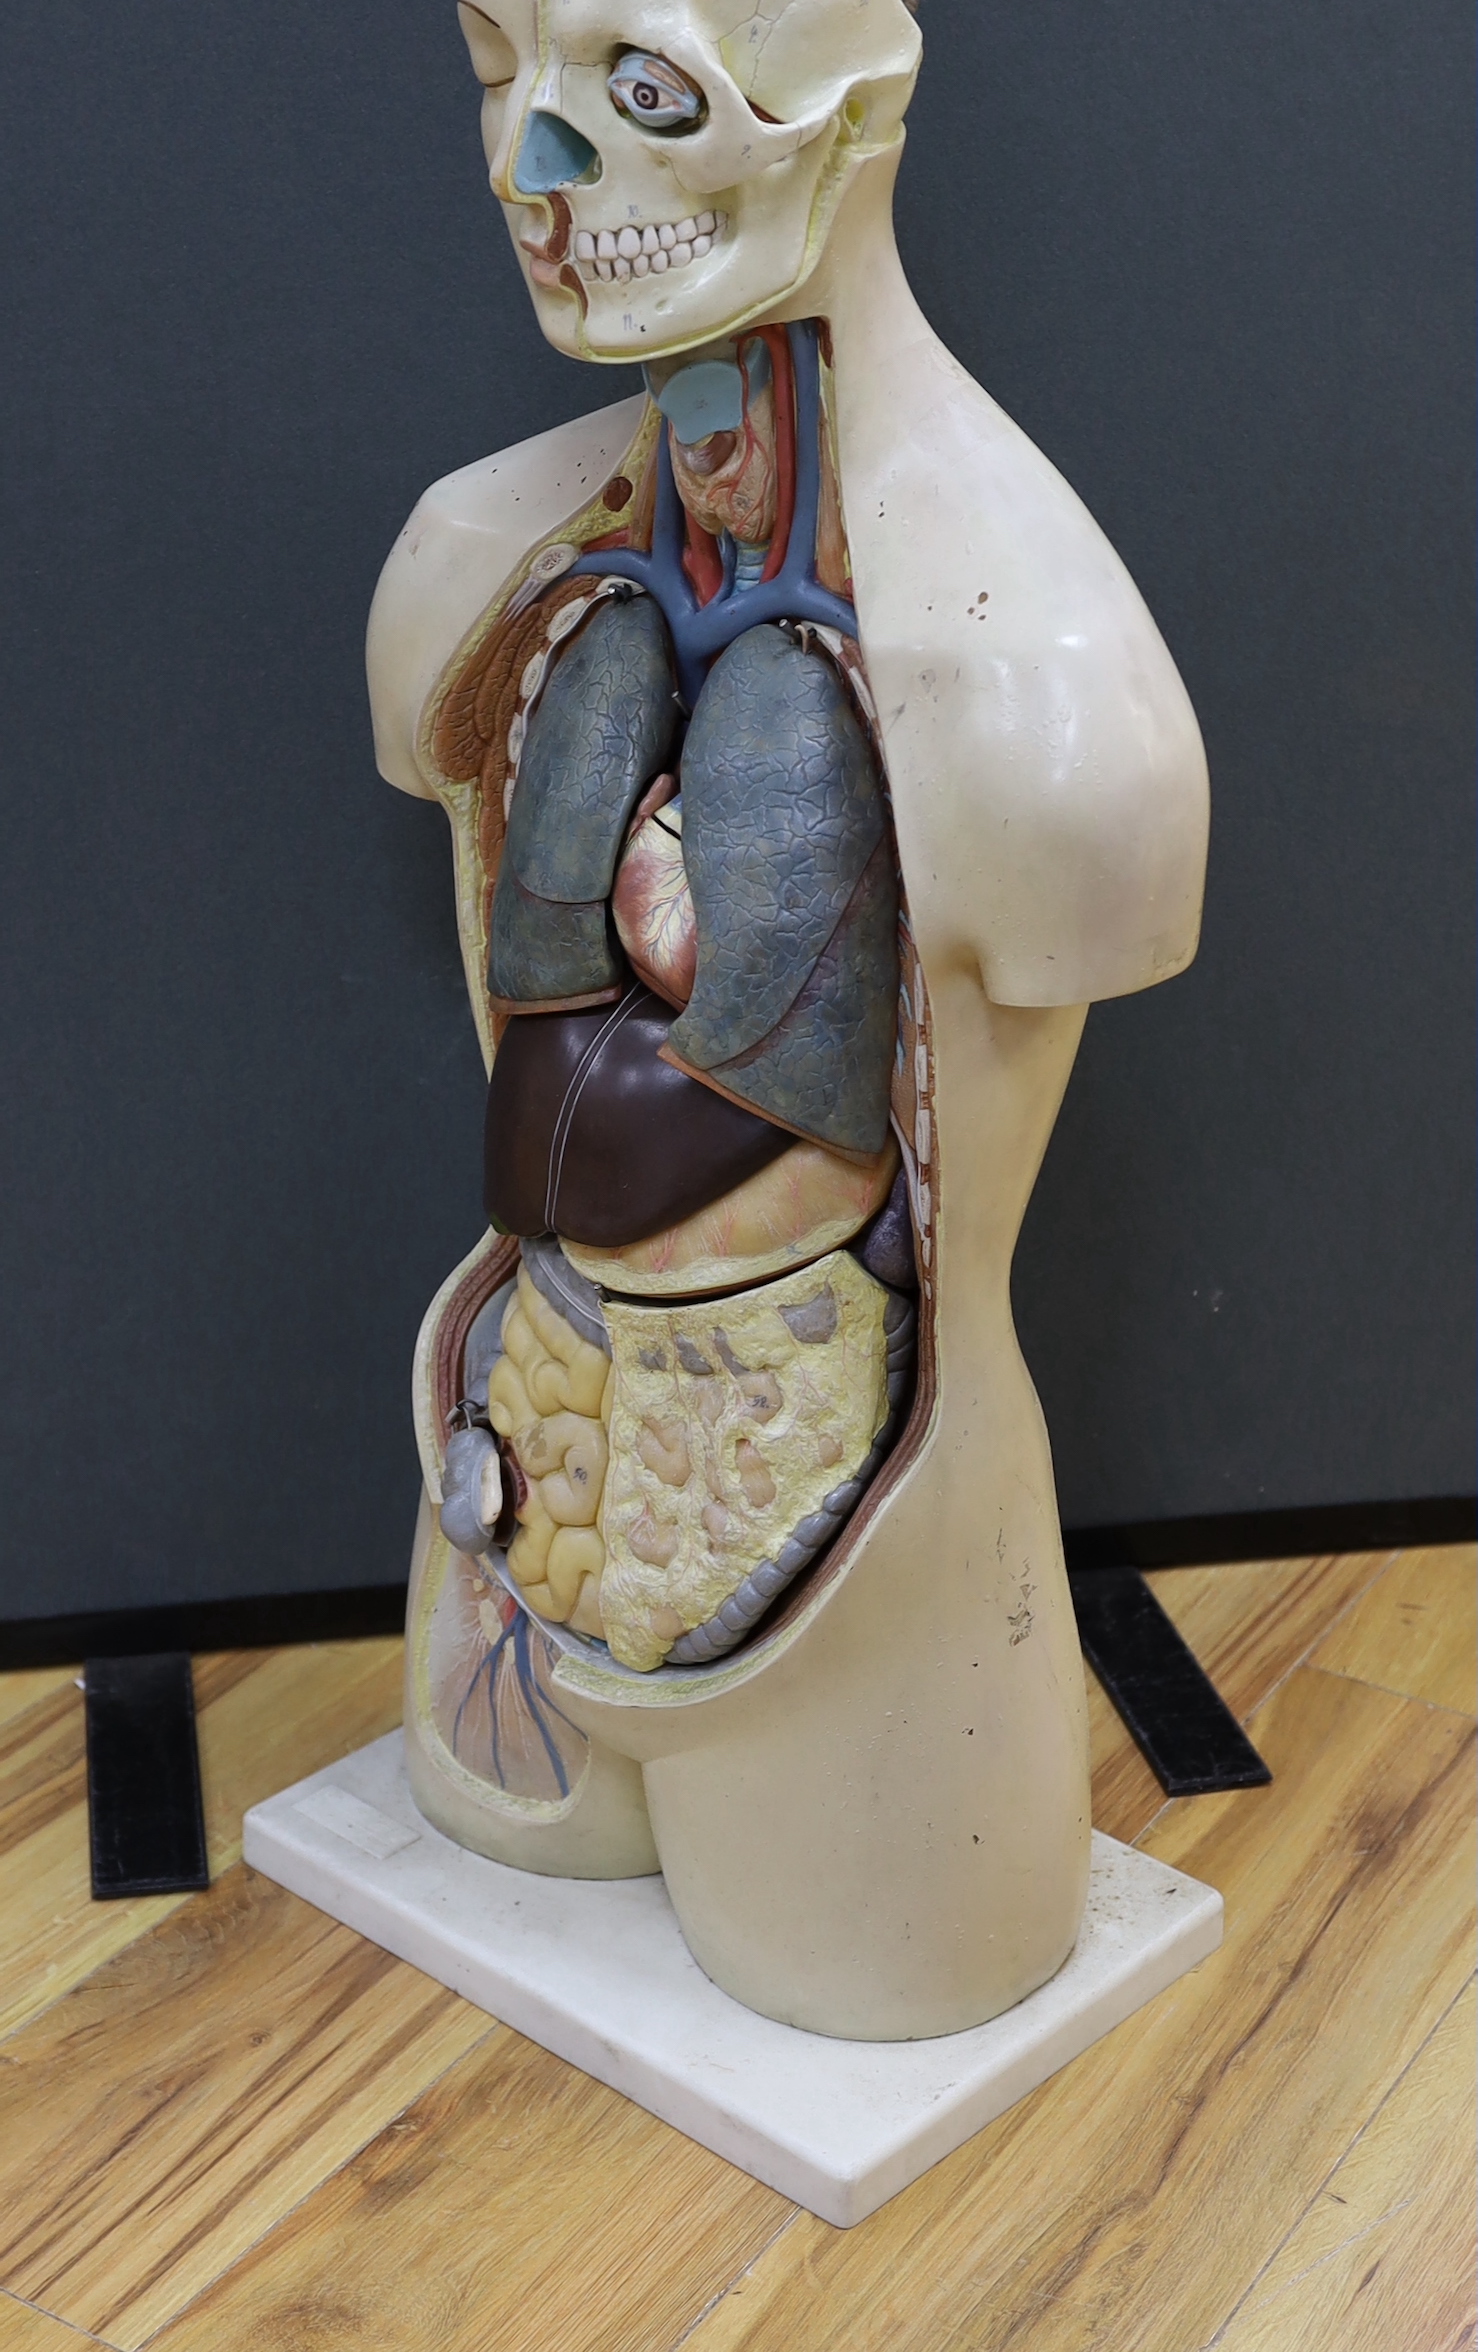 A 1950s/60s medical school educational plastic and painted composite anatomical model on base by E. - Image 3 of 4